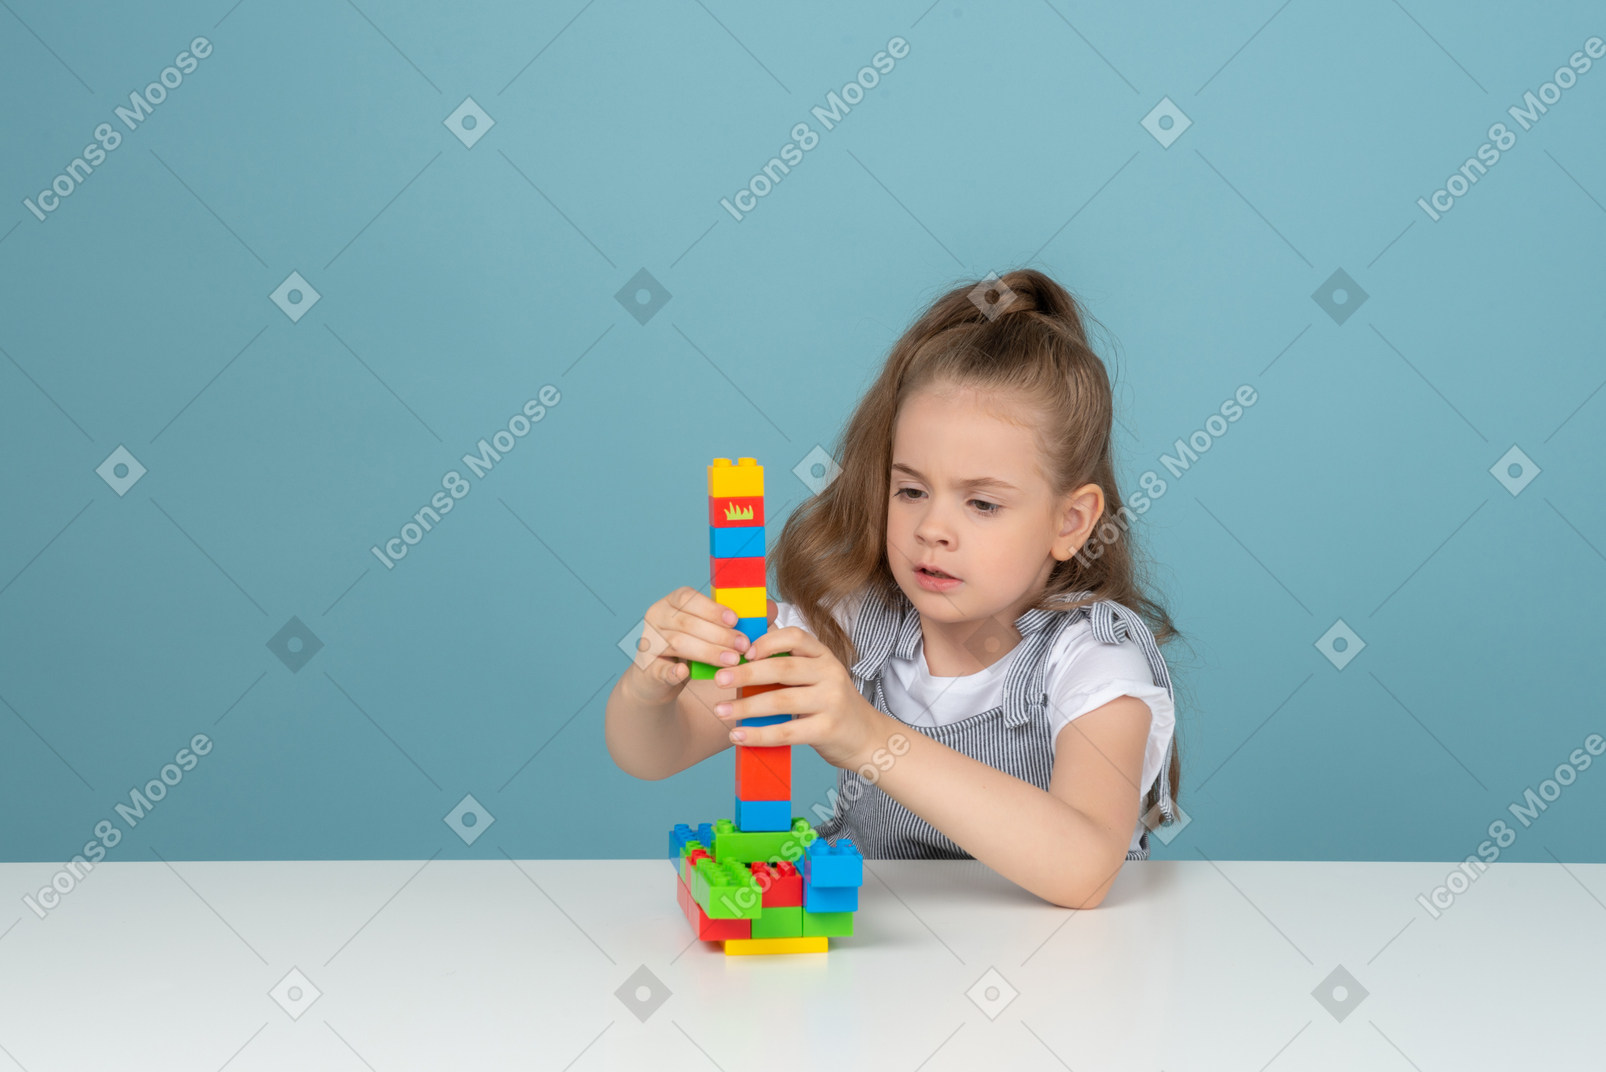 Little girl building a tower with lego blocks